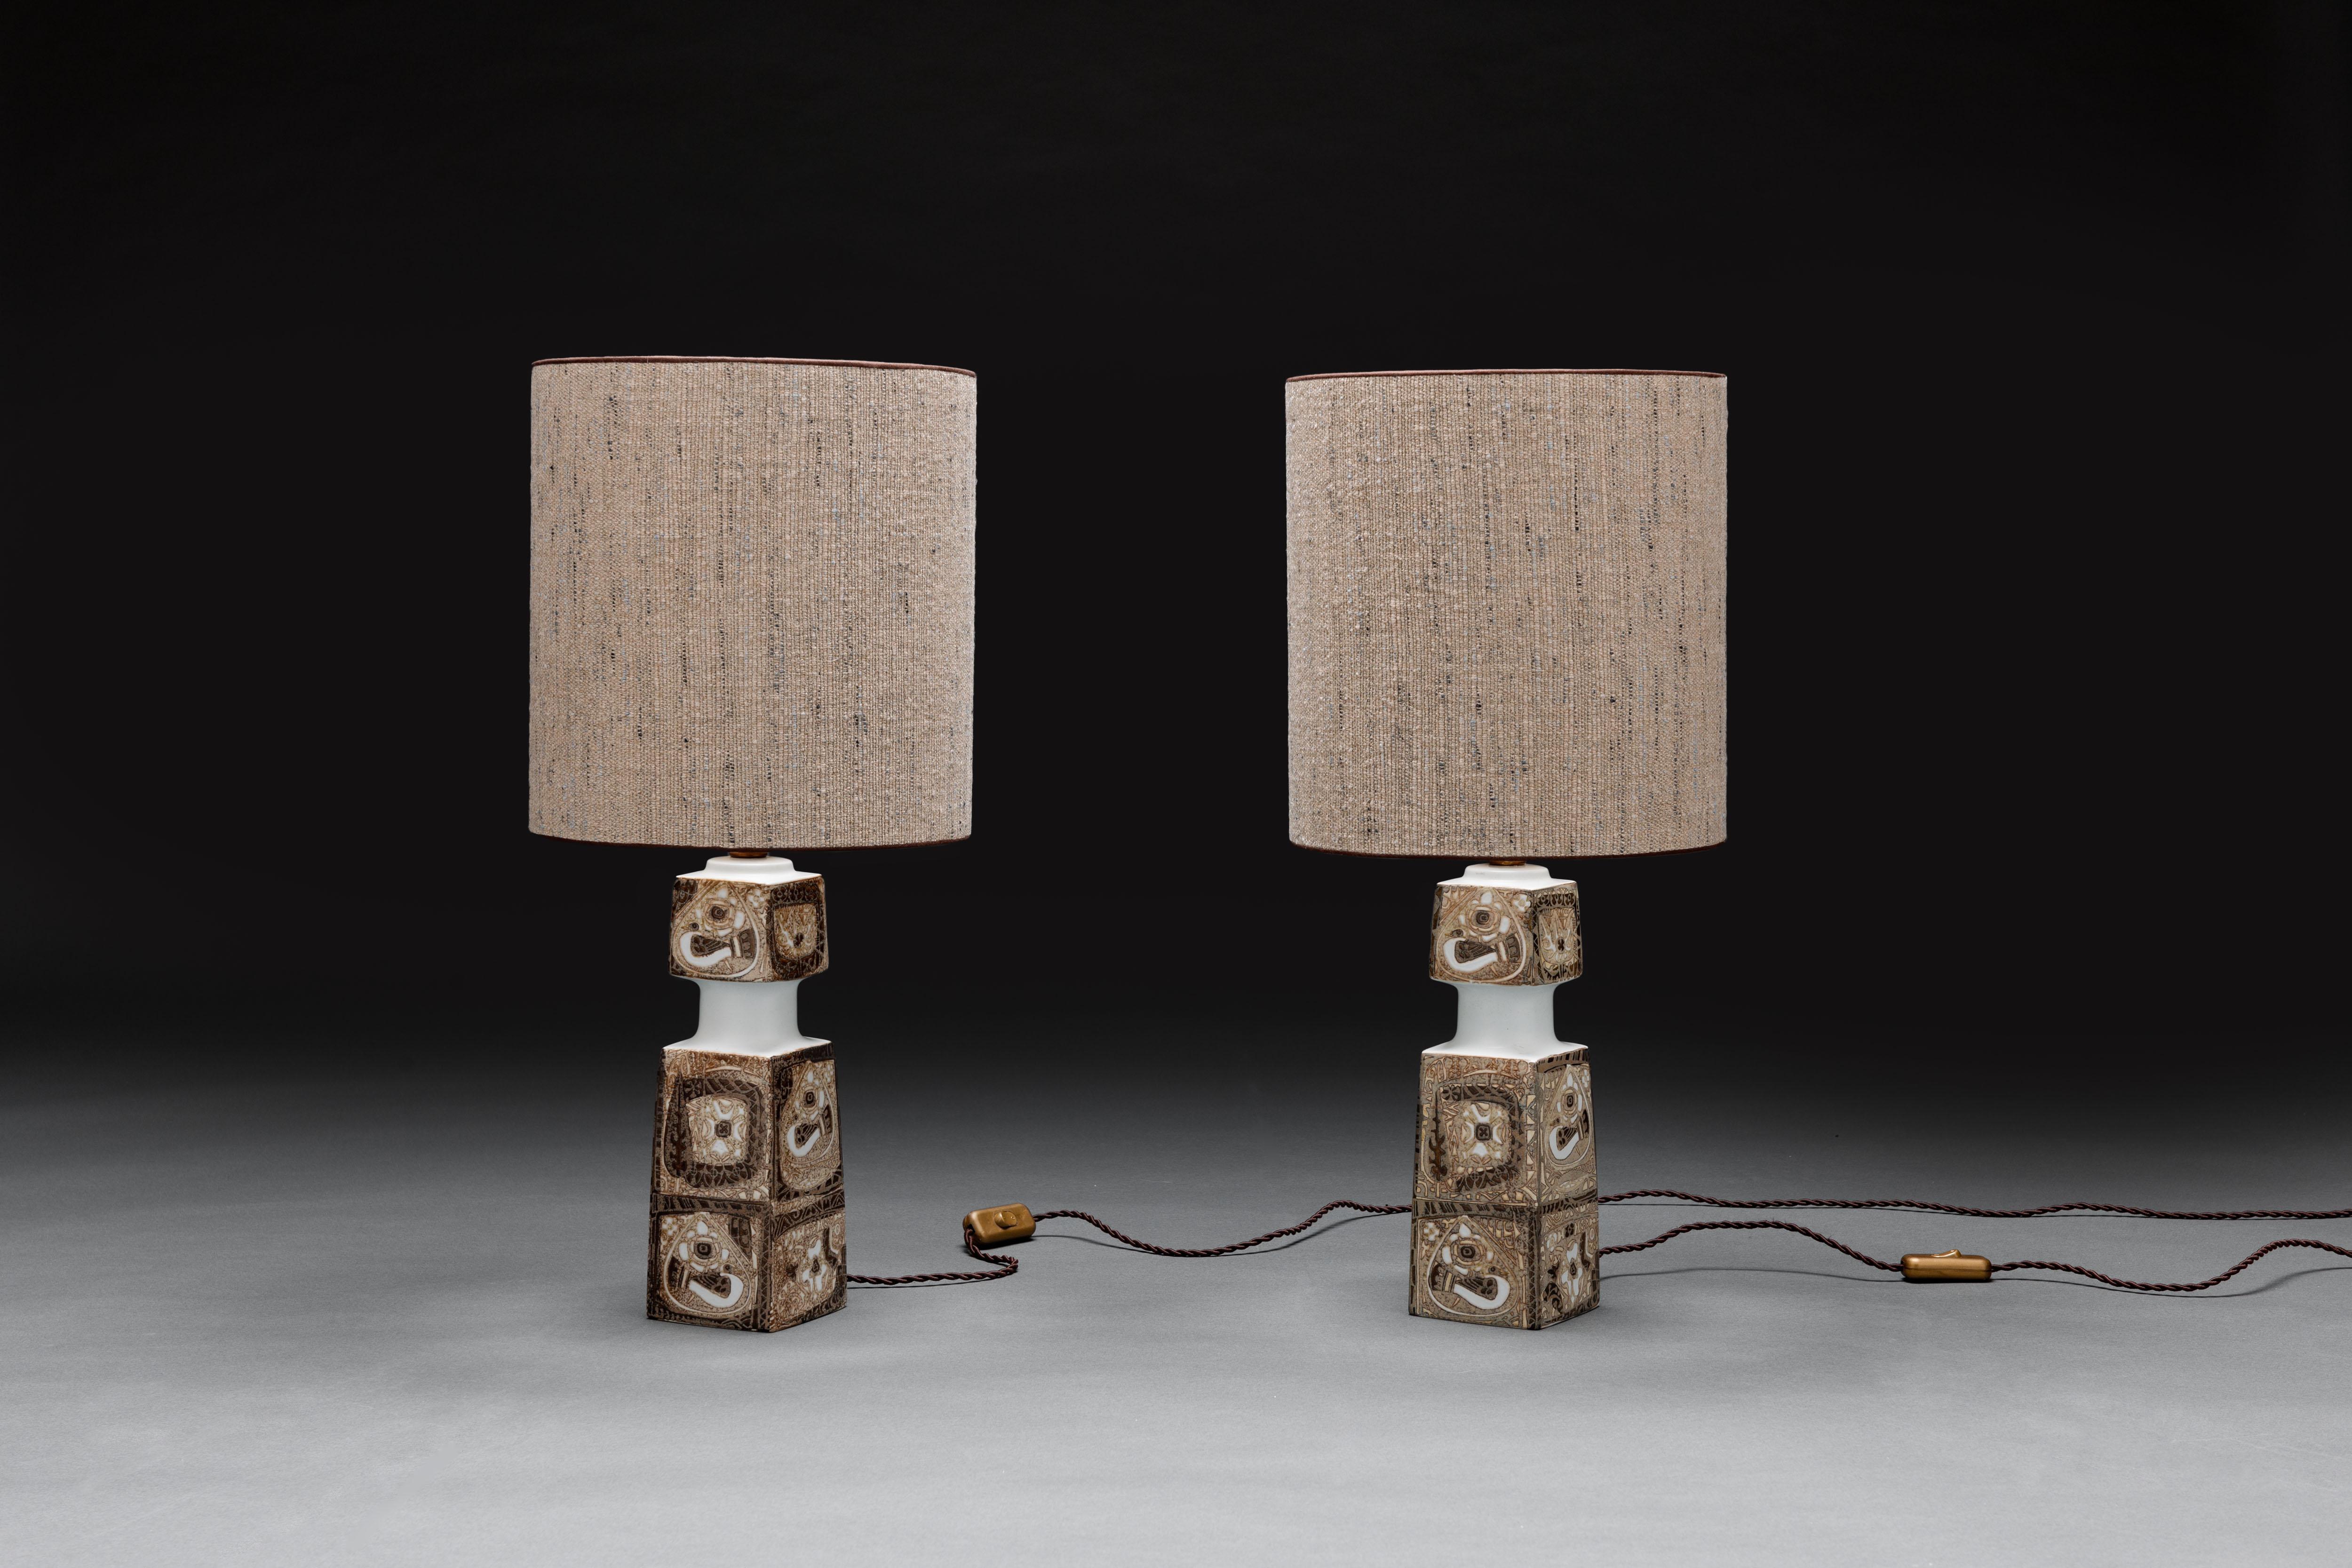 Beautiful pair of Scandinavian faience glazed earthenware table lamps from the 'Baca' series by Danish artist Nils Thorsson for Royal Copenhagen & Fog & Morup
Denmark. 

Lamps are executed with quality custom hand-made lamp shades upholstered in